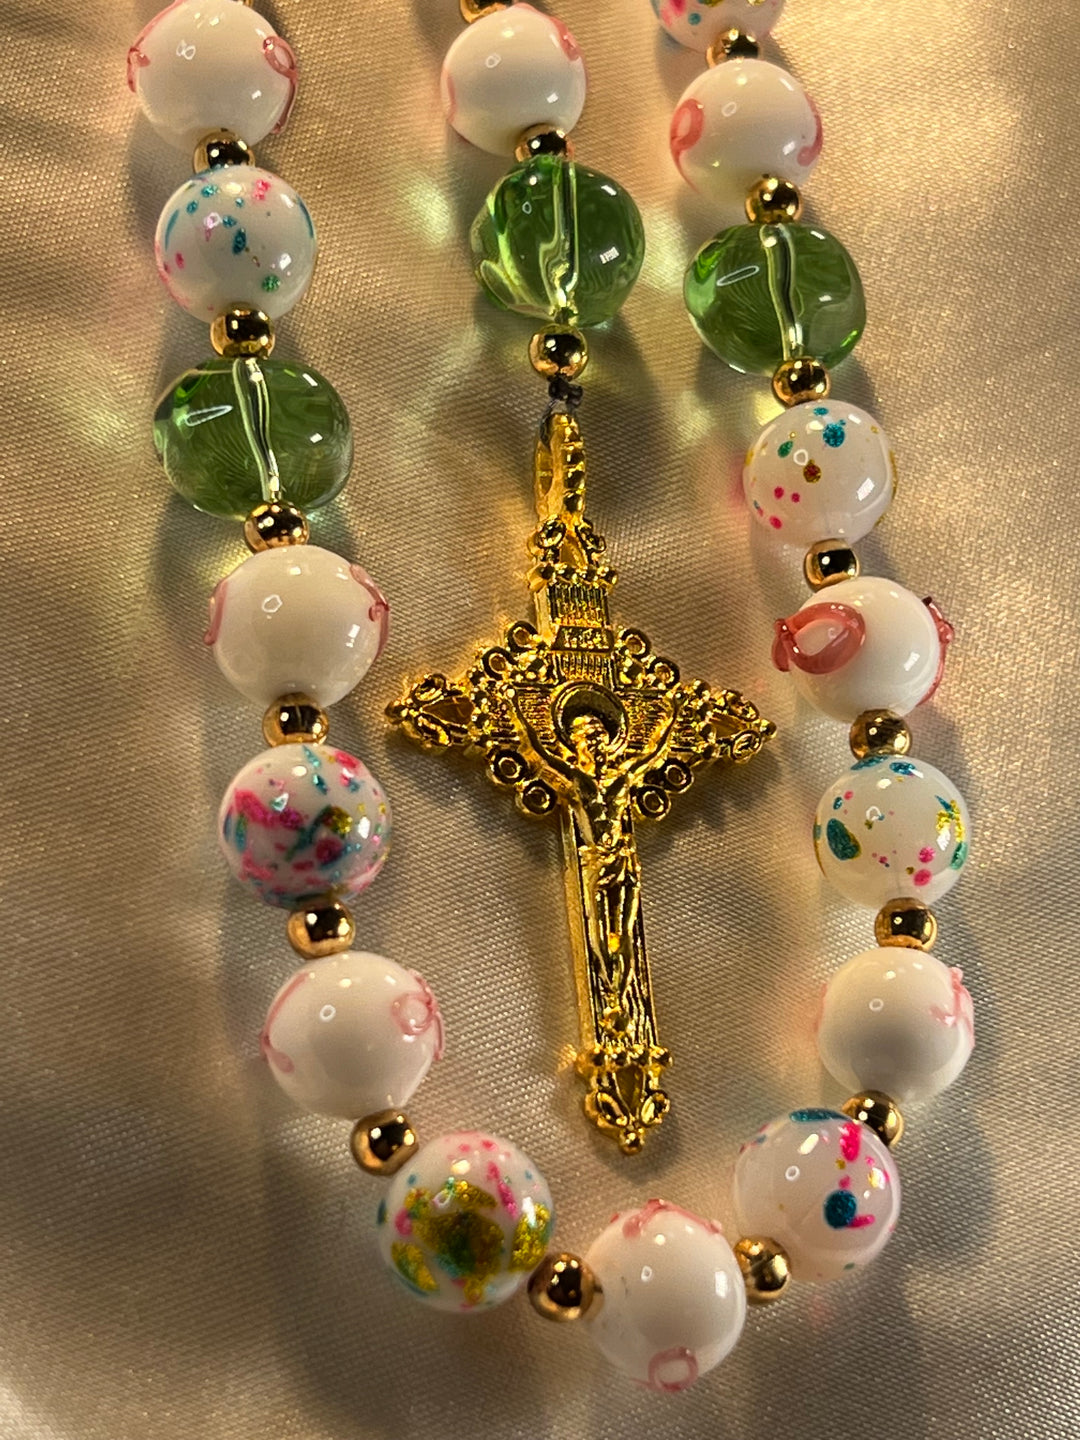 Breast Cancer Rosary